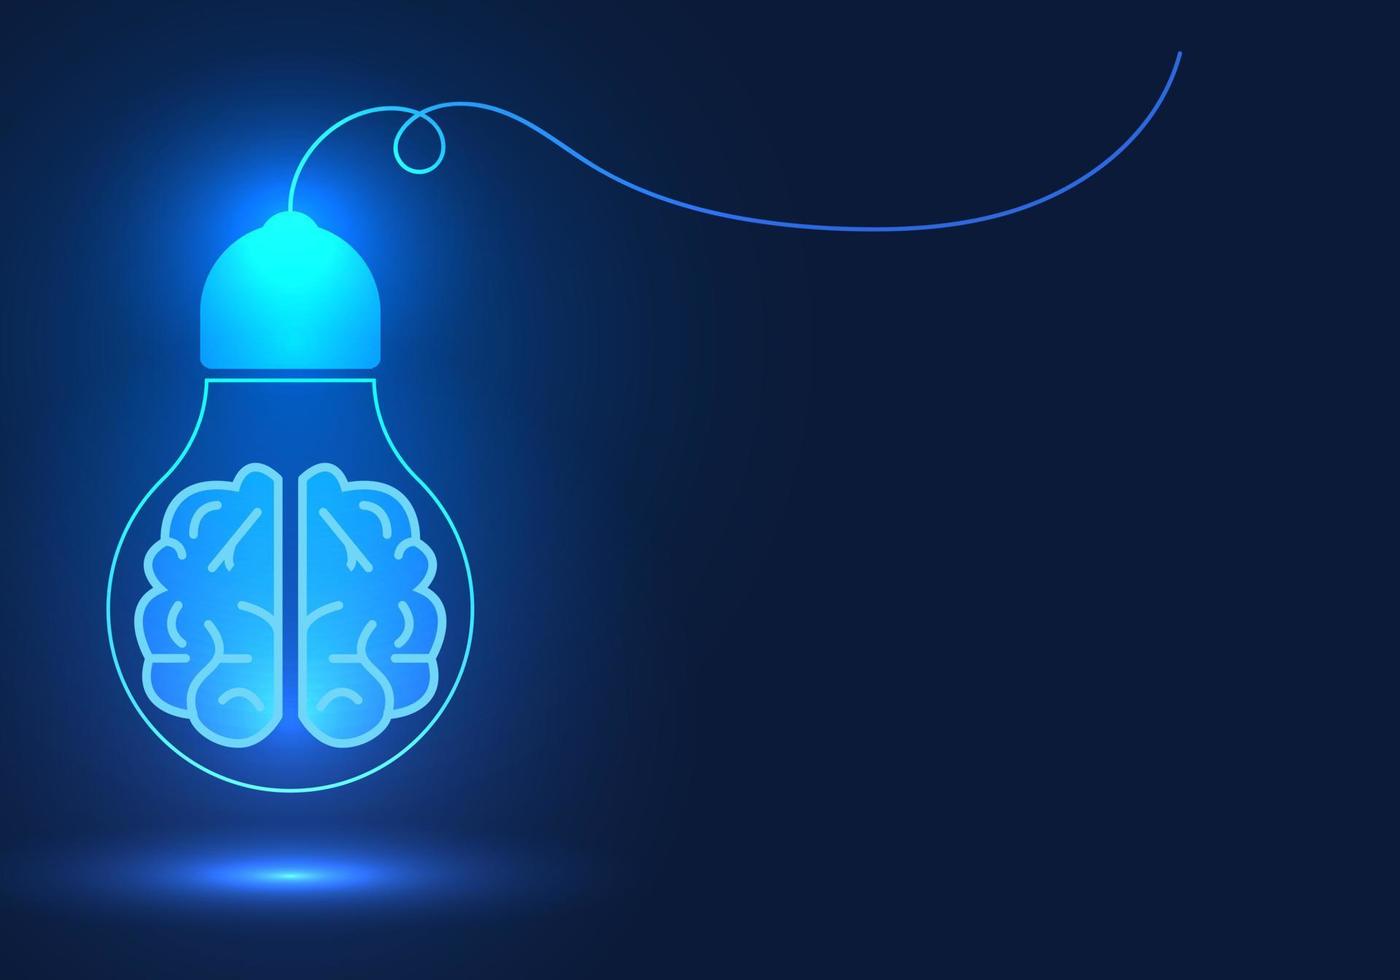 Bulb has a brain hanging down, meaning it's the brain of an artificial intelligence system that helps humans come up with new job ideas to offer customers and solve business problems. vector